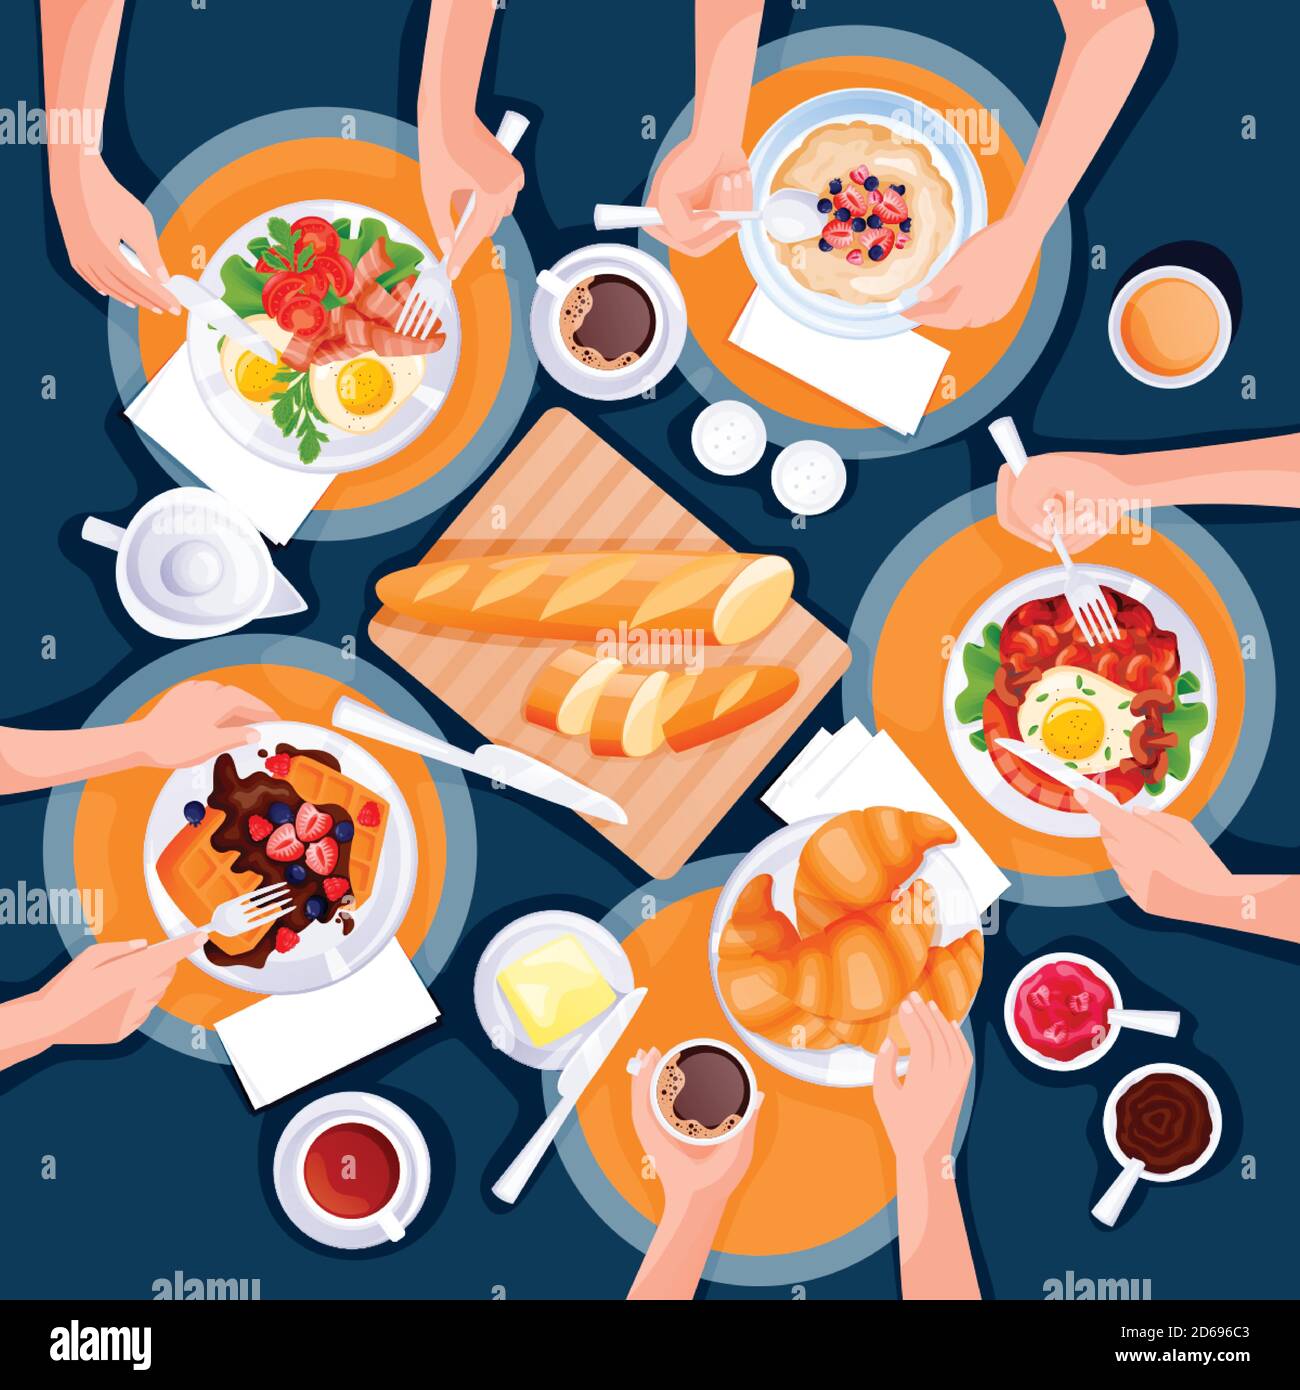 People have breakfast. Top view flat cartoon illustration of brunch meal. Eggs, coffee, waffles, oatmeal porridge, croissant and tea cups on table. Mo Stock Vector